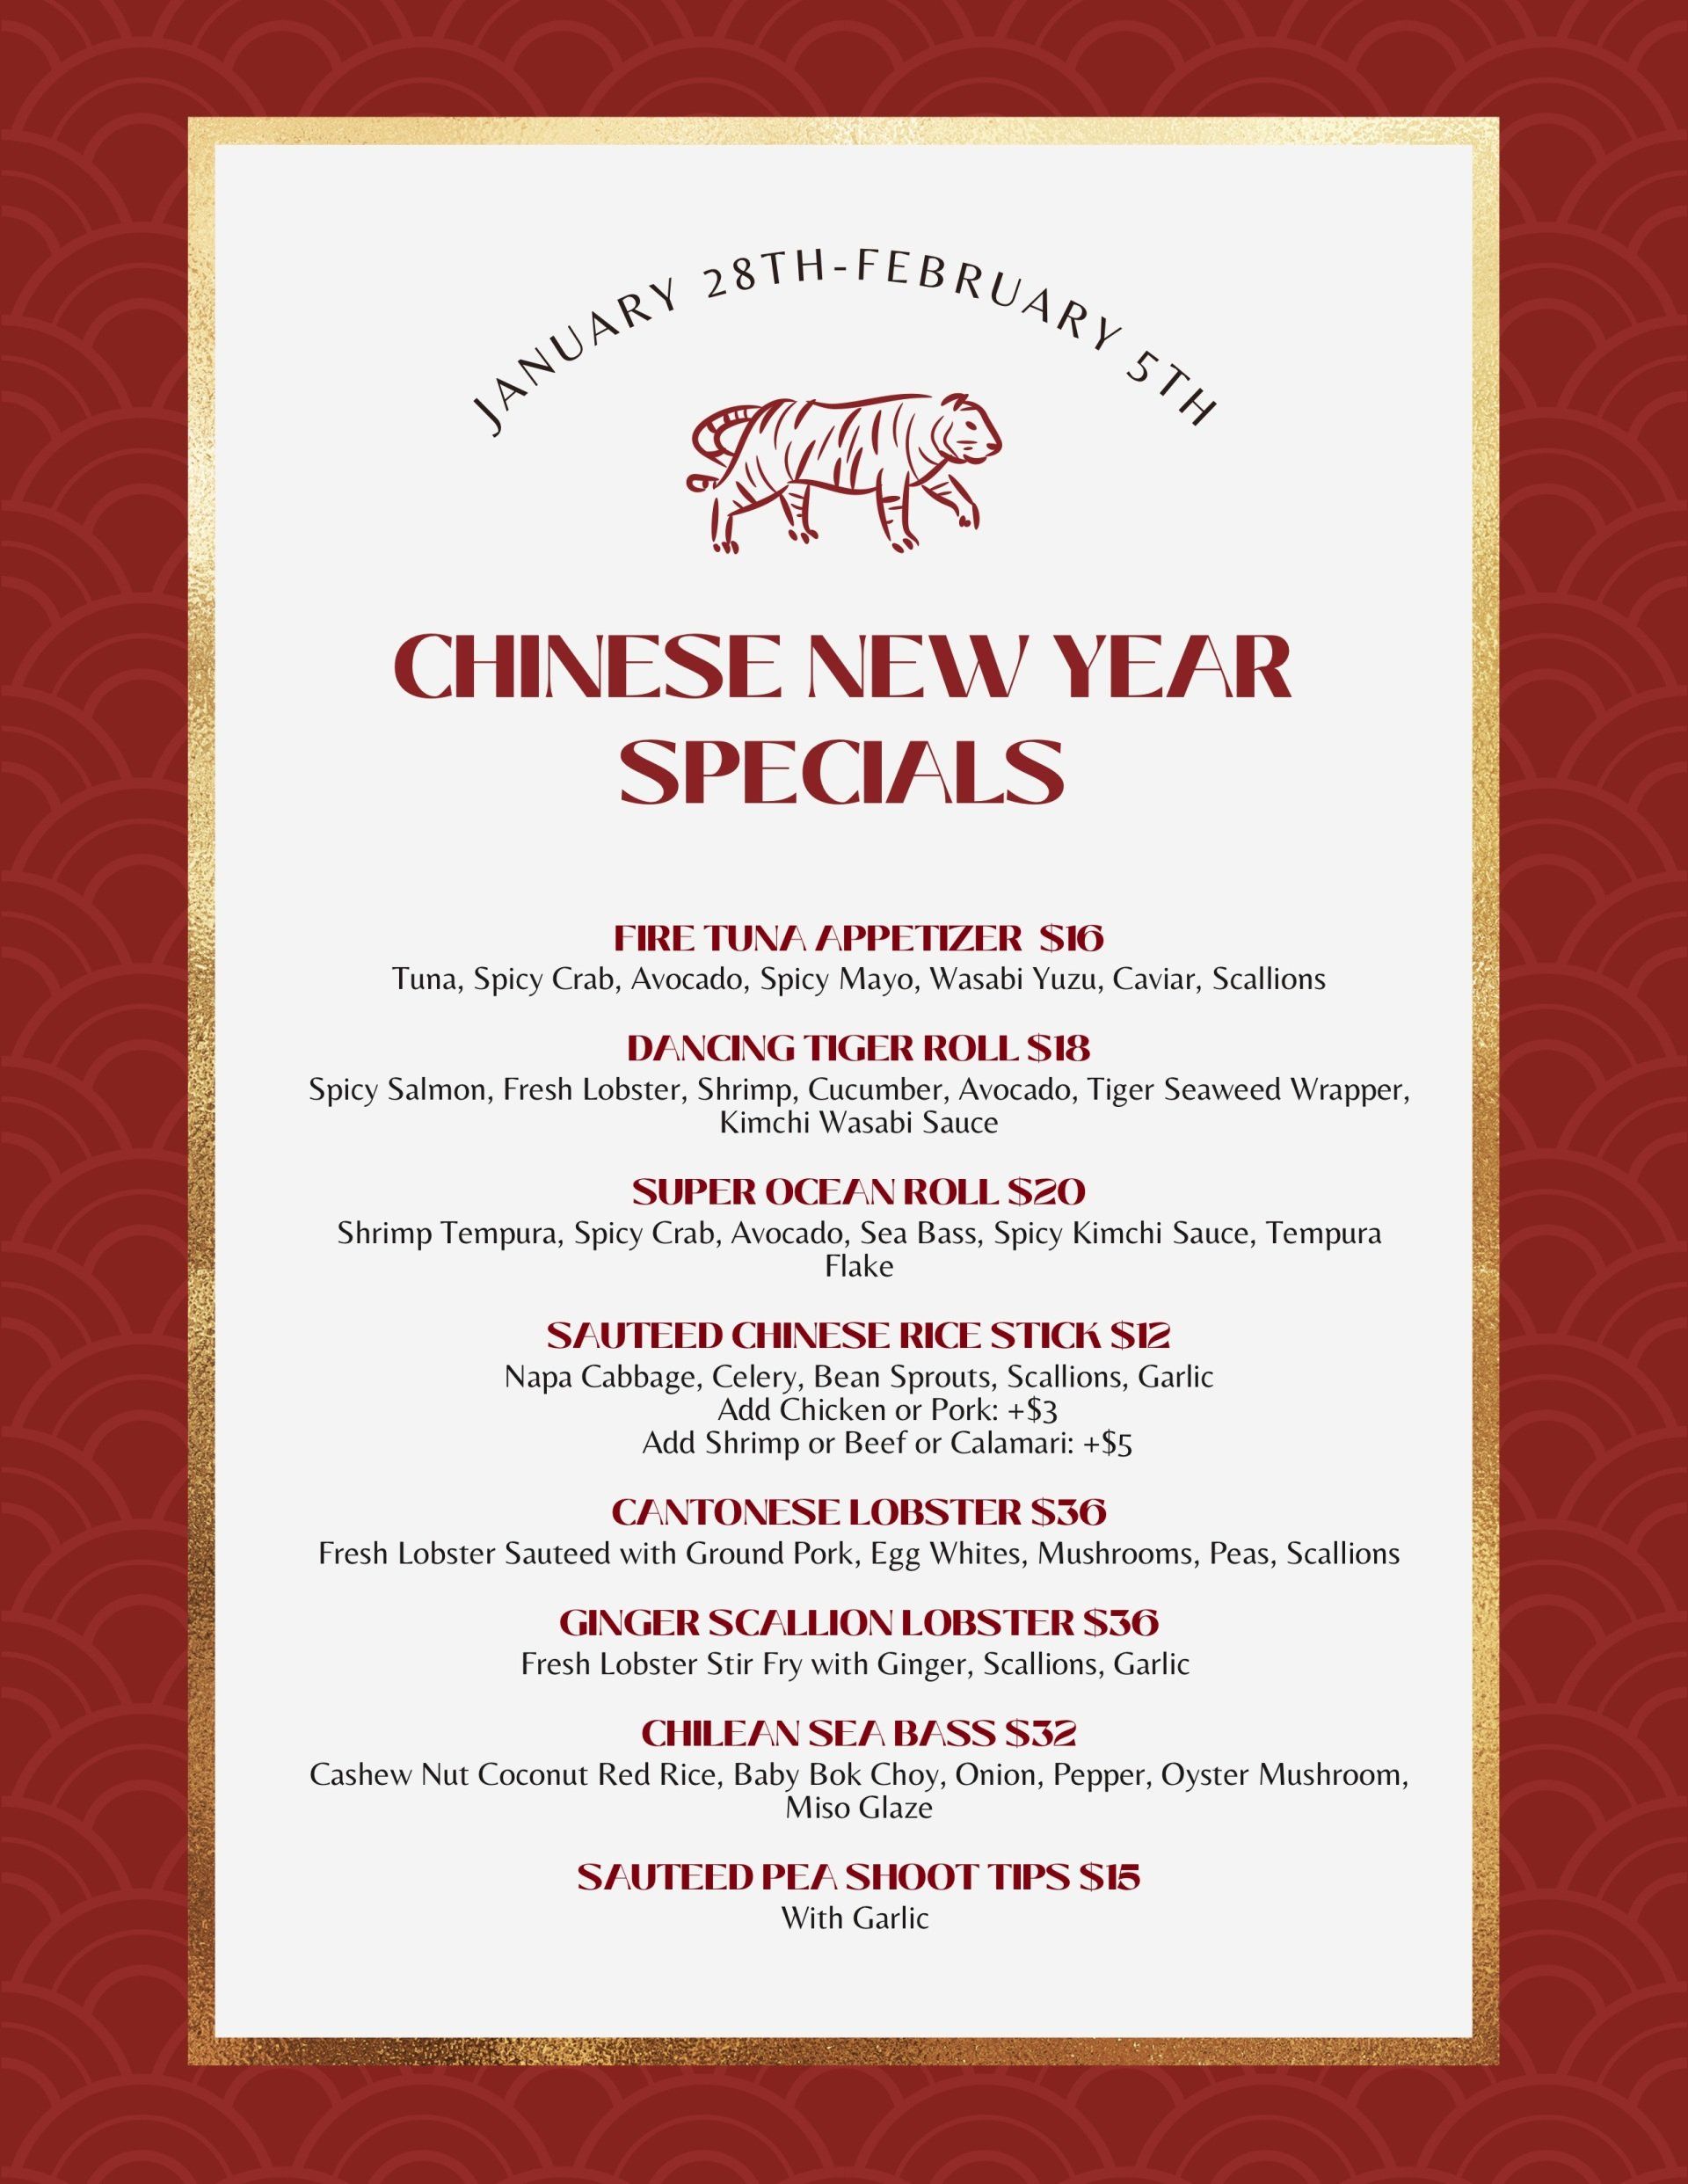 Chinese New Year Restaurant Specials in Simsbury CT